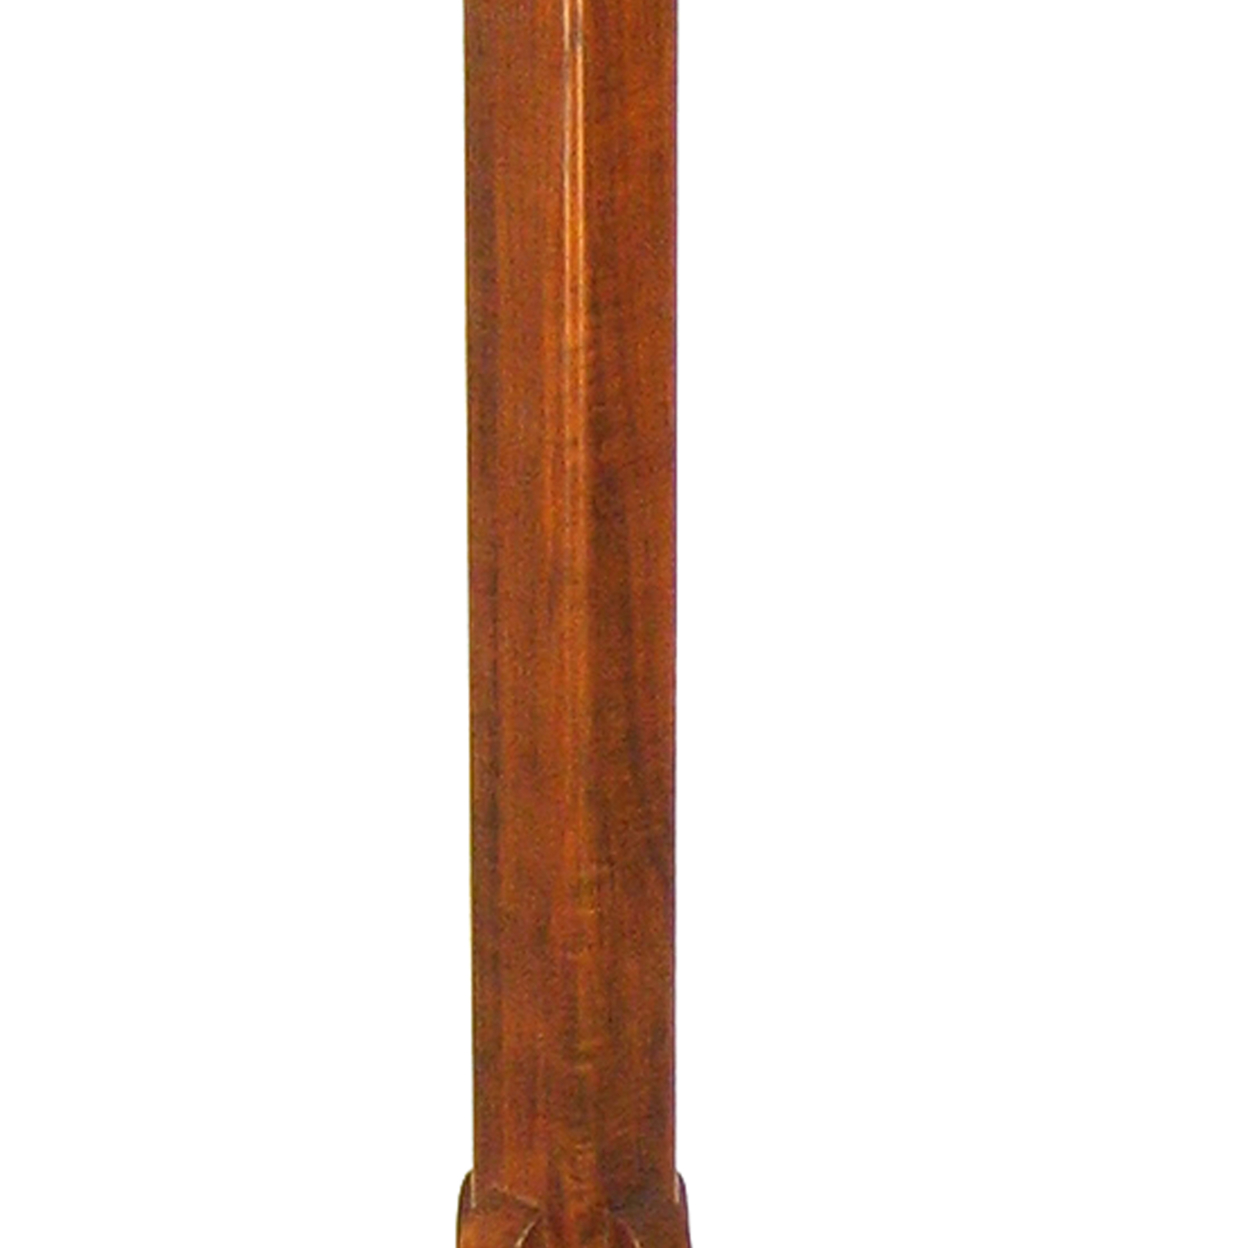 Wooden Coat Stand With X Frame Base And Metal Hooks, Oak Brown- Saltoro Sherpi